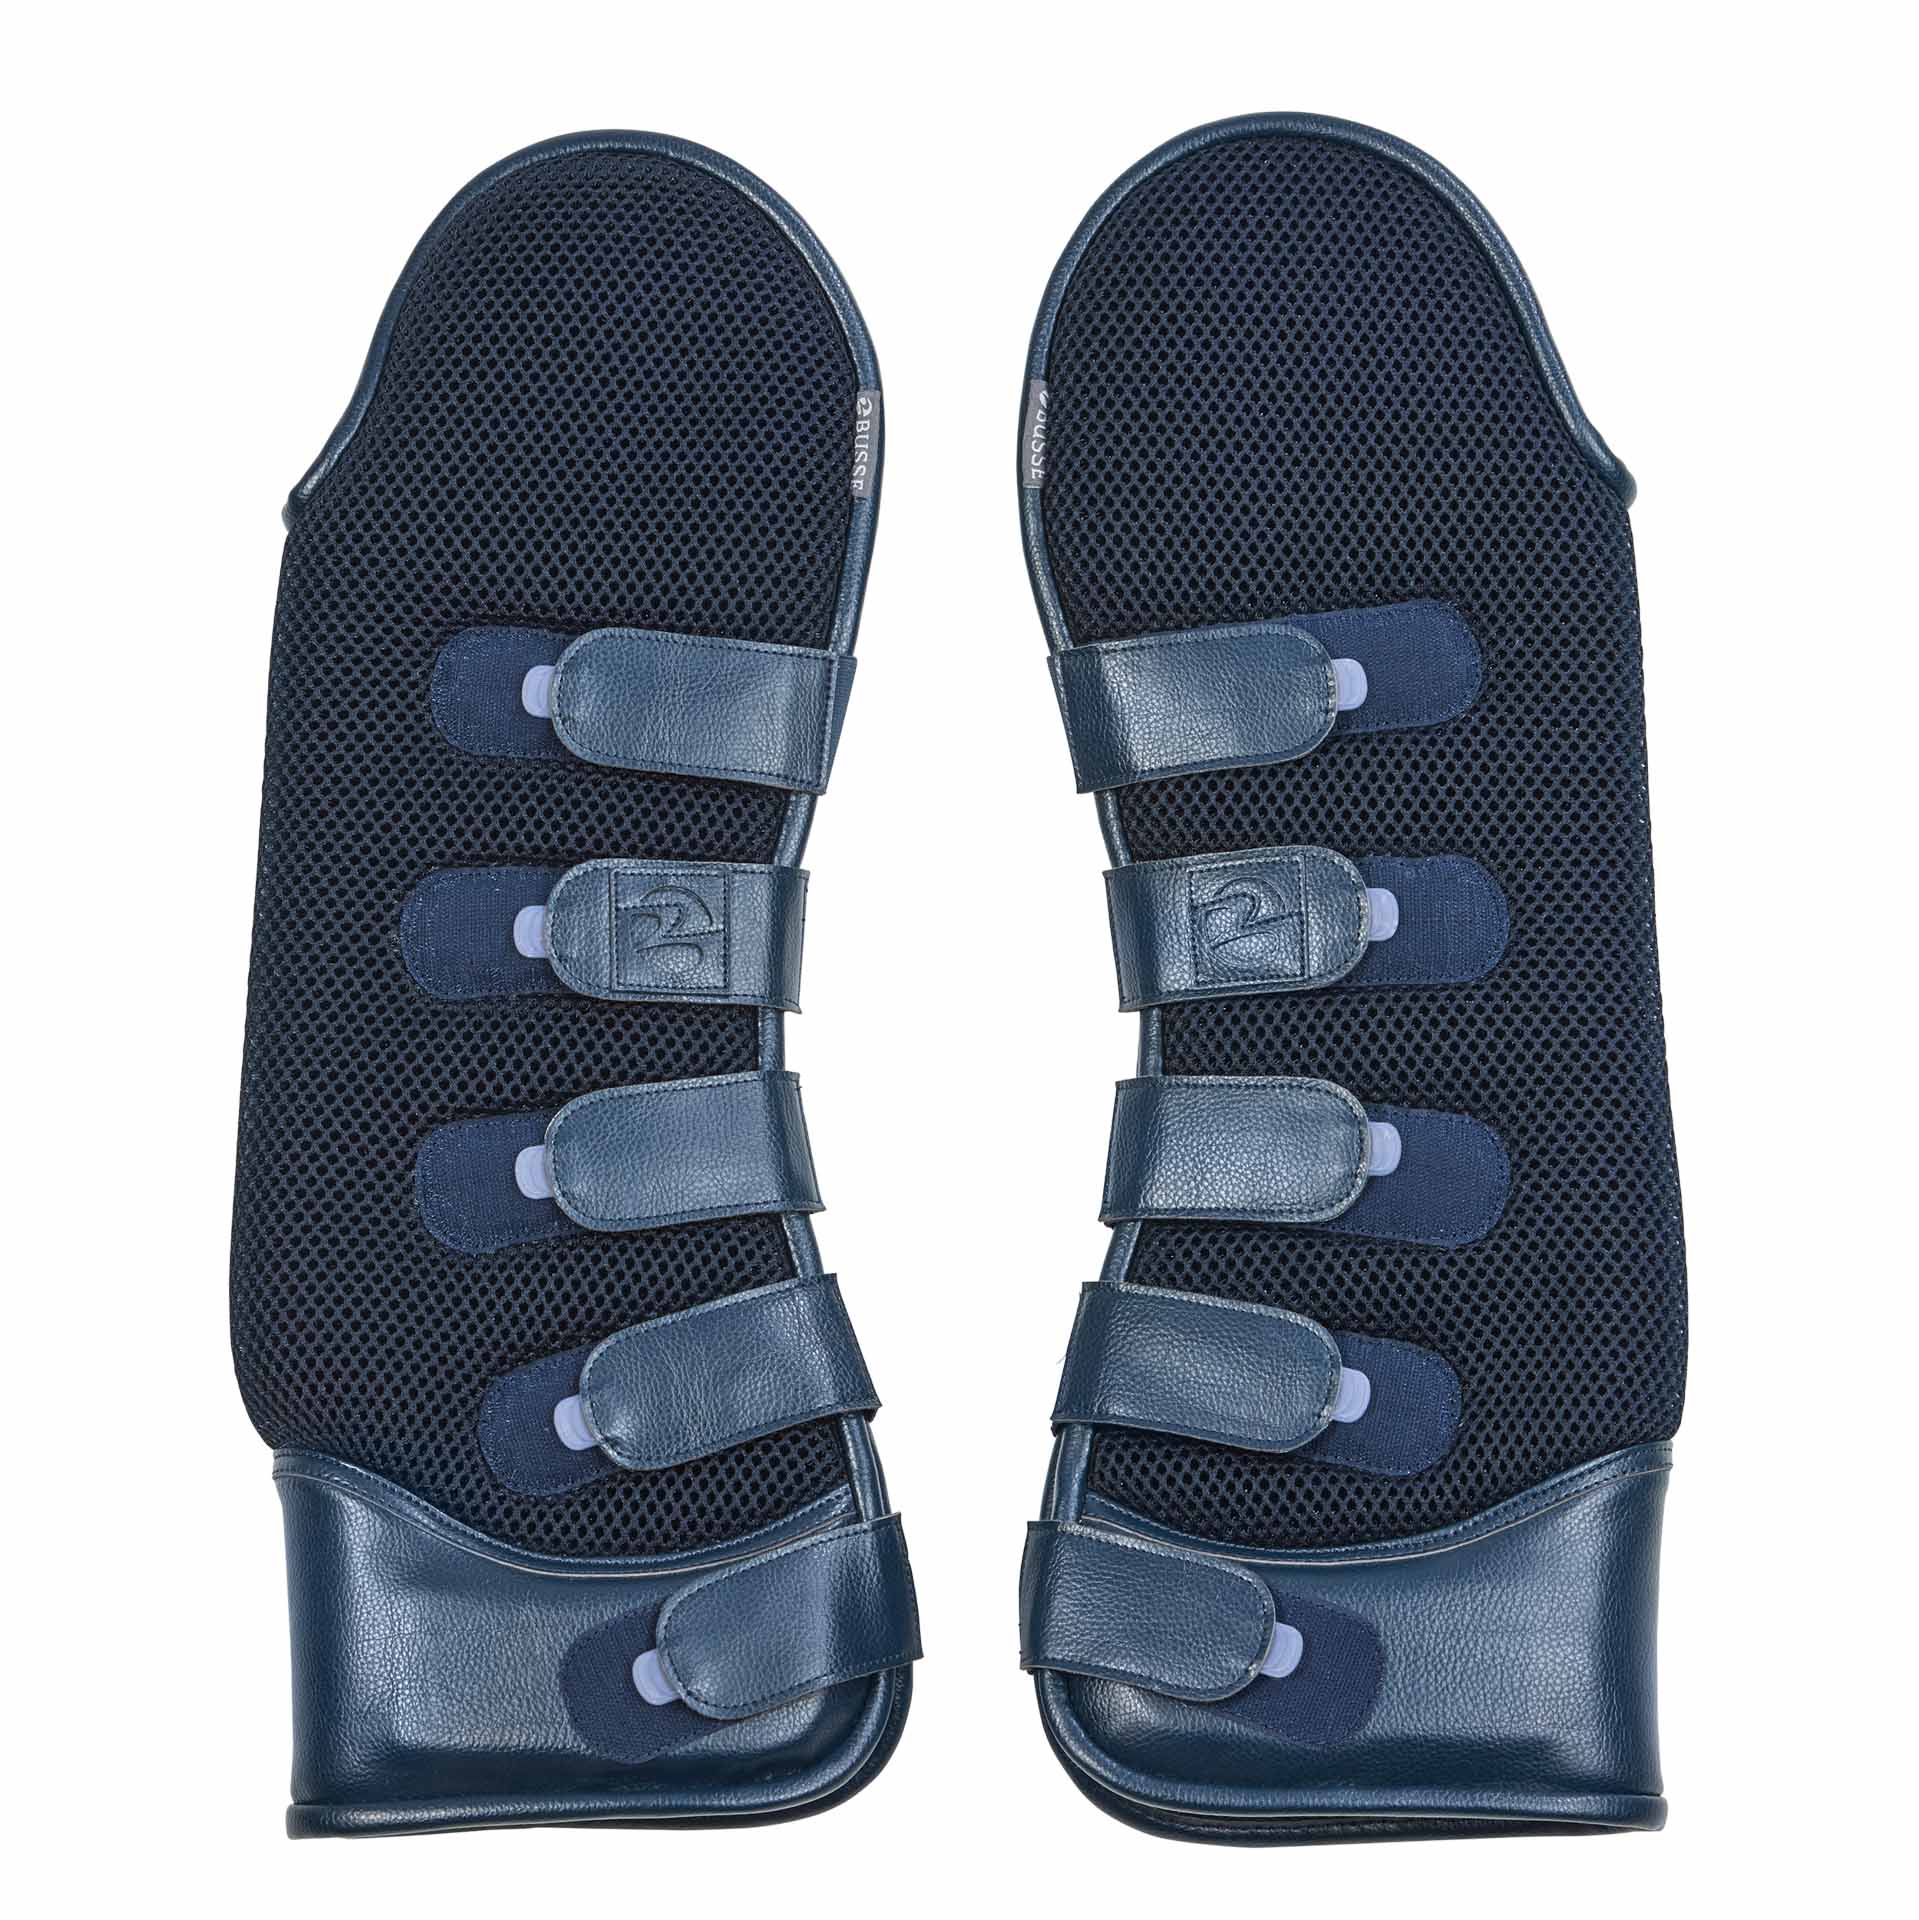 BUSSE Travelling Boots 3D AIR EFFECT FULL-front navy